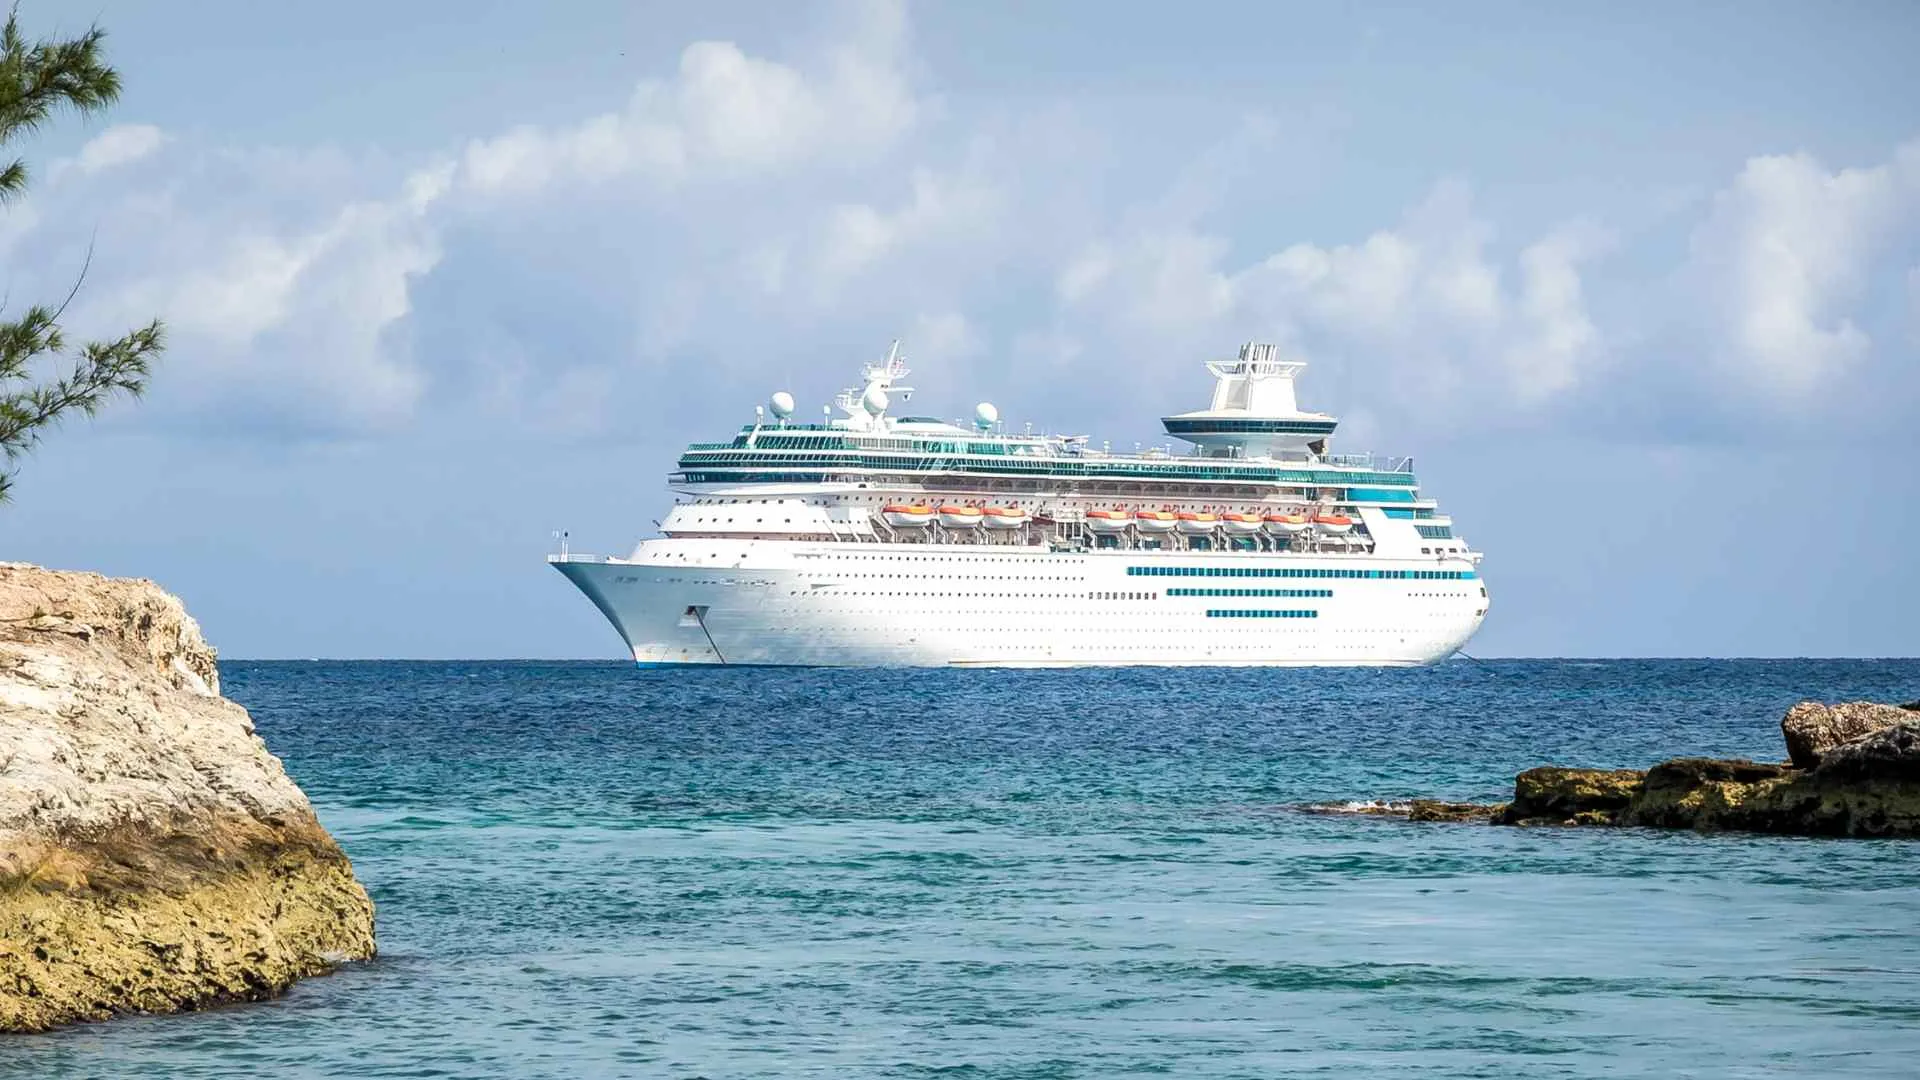 Cruise-Specific Visa and Tourist Card Arrangements